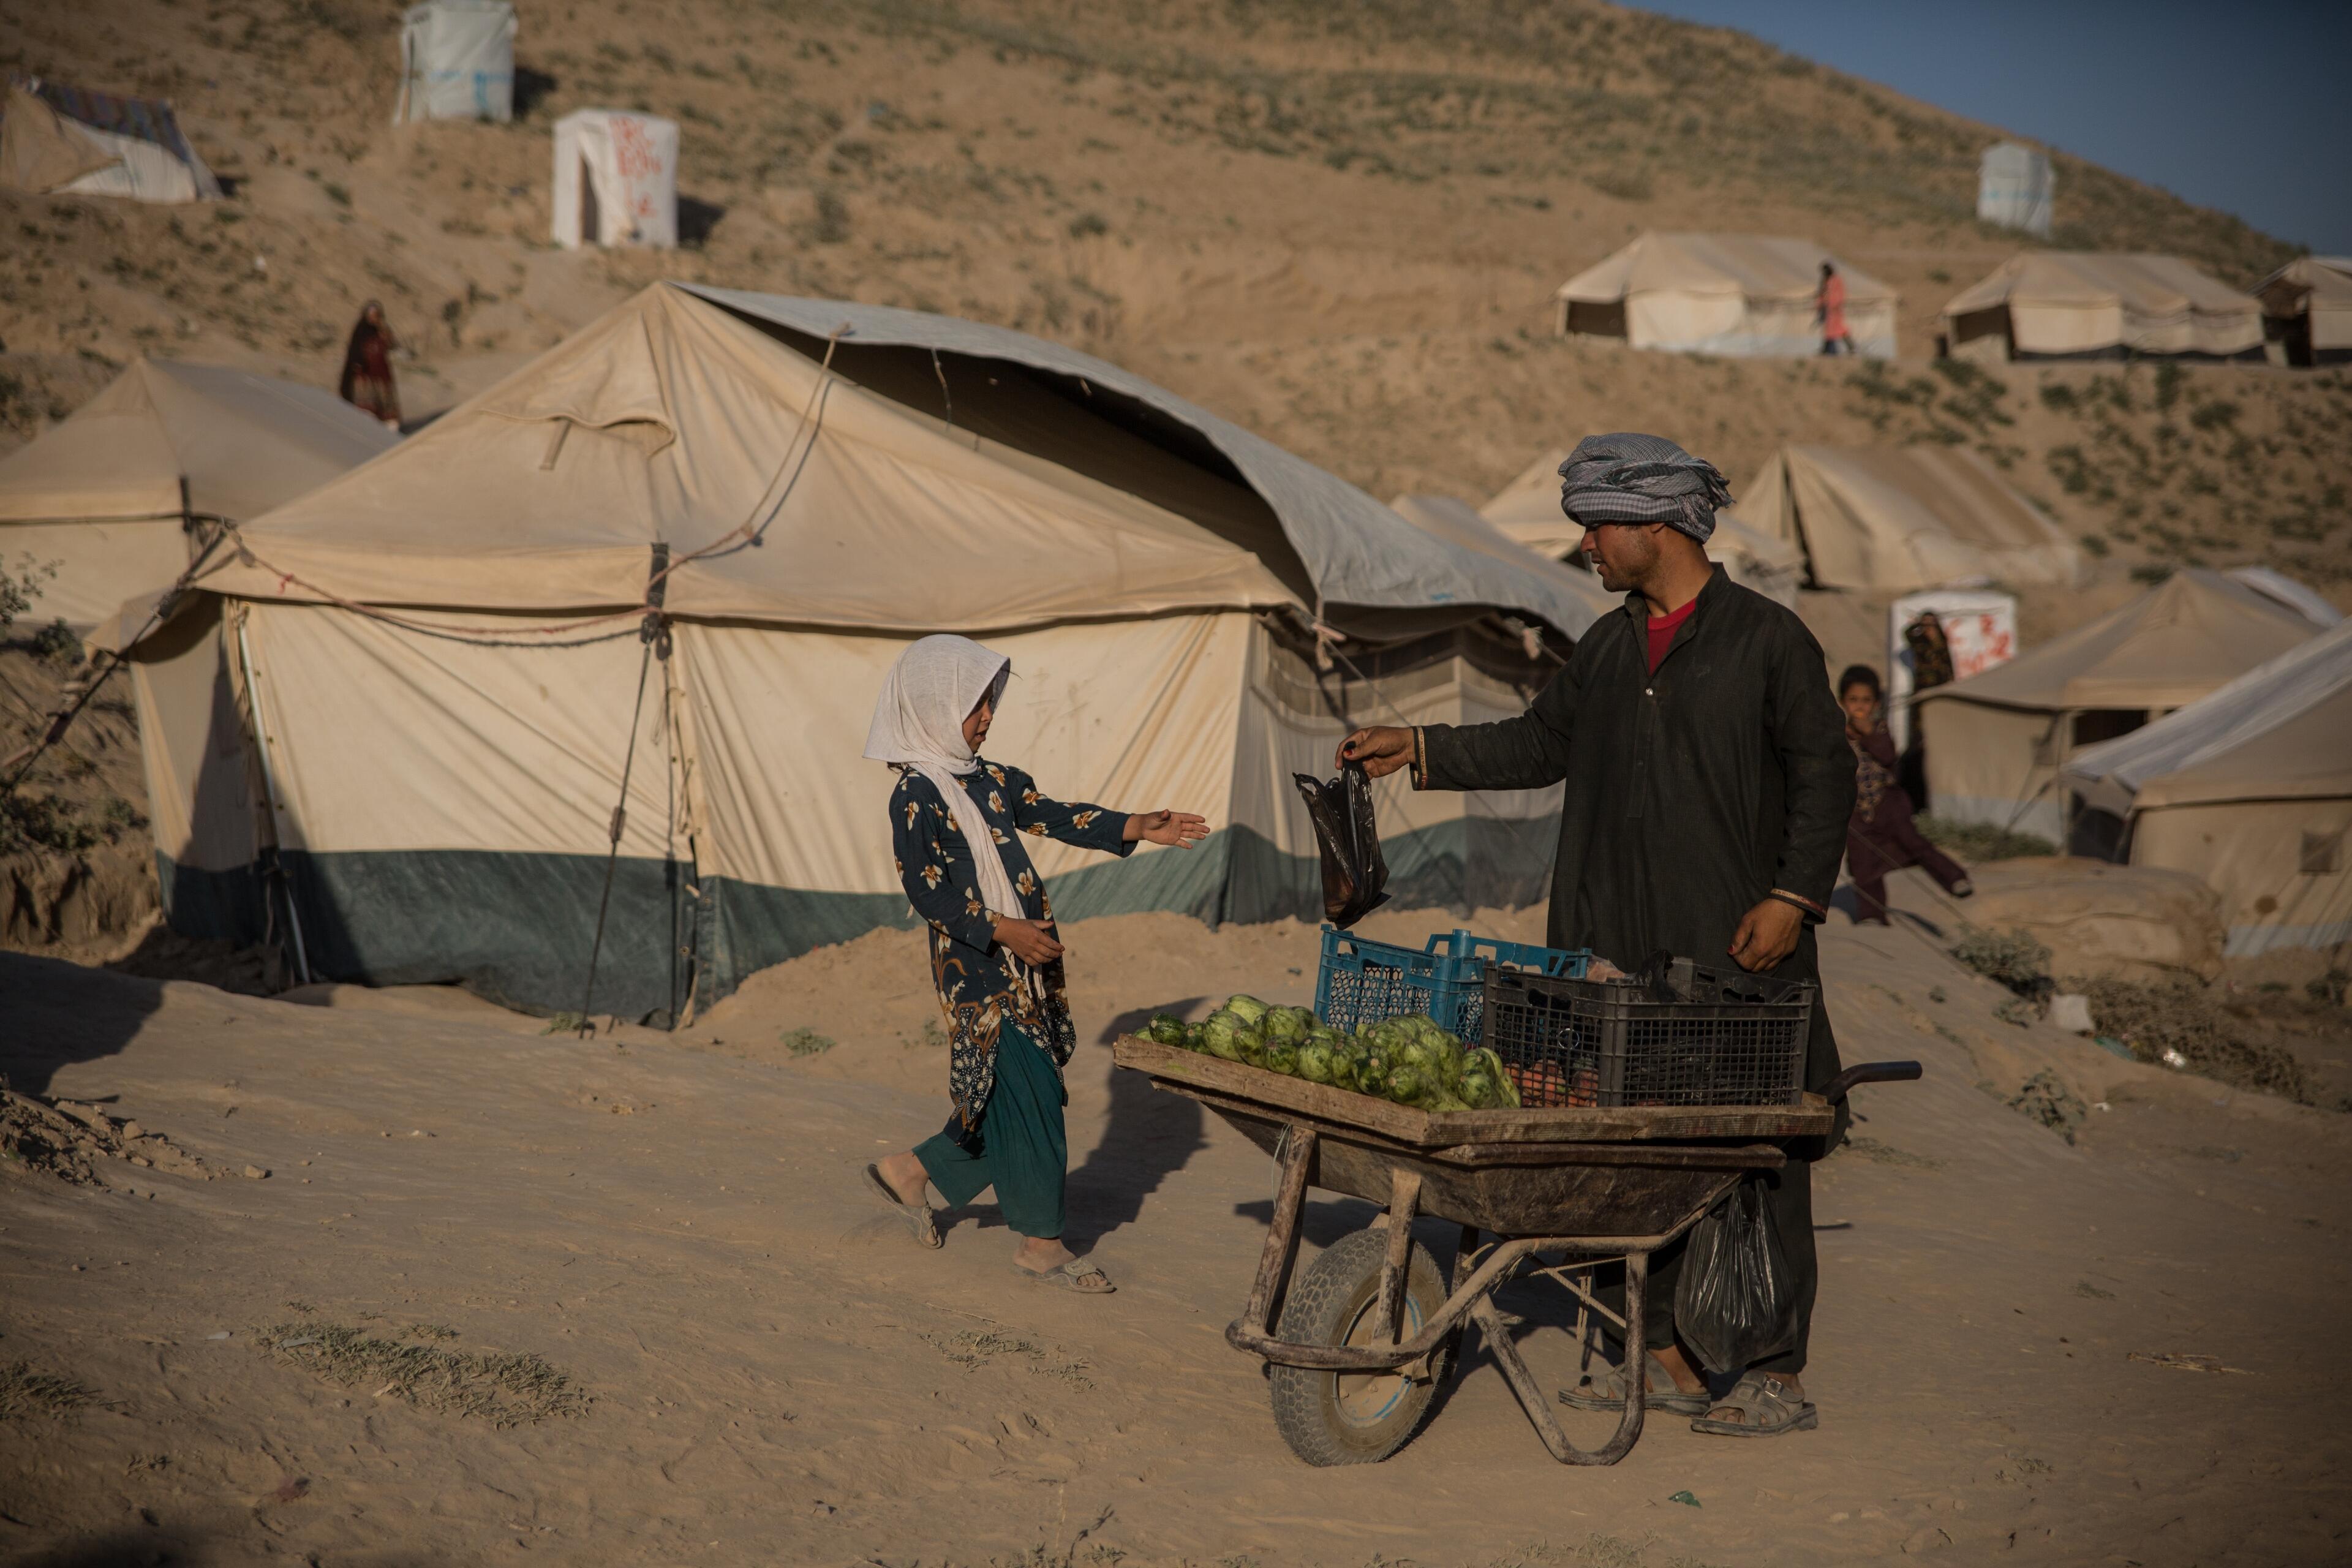 A man pushing a wheelbarrow with vegetables through a tent camp for displaced families in Badghis, Afghanistan hands a girl a plastic bag.